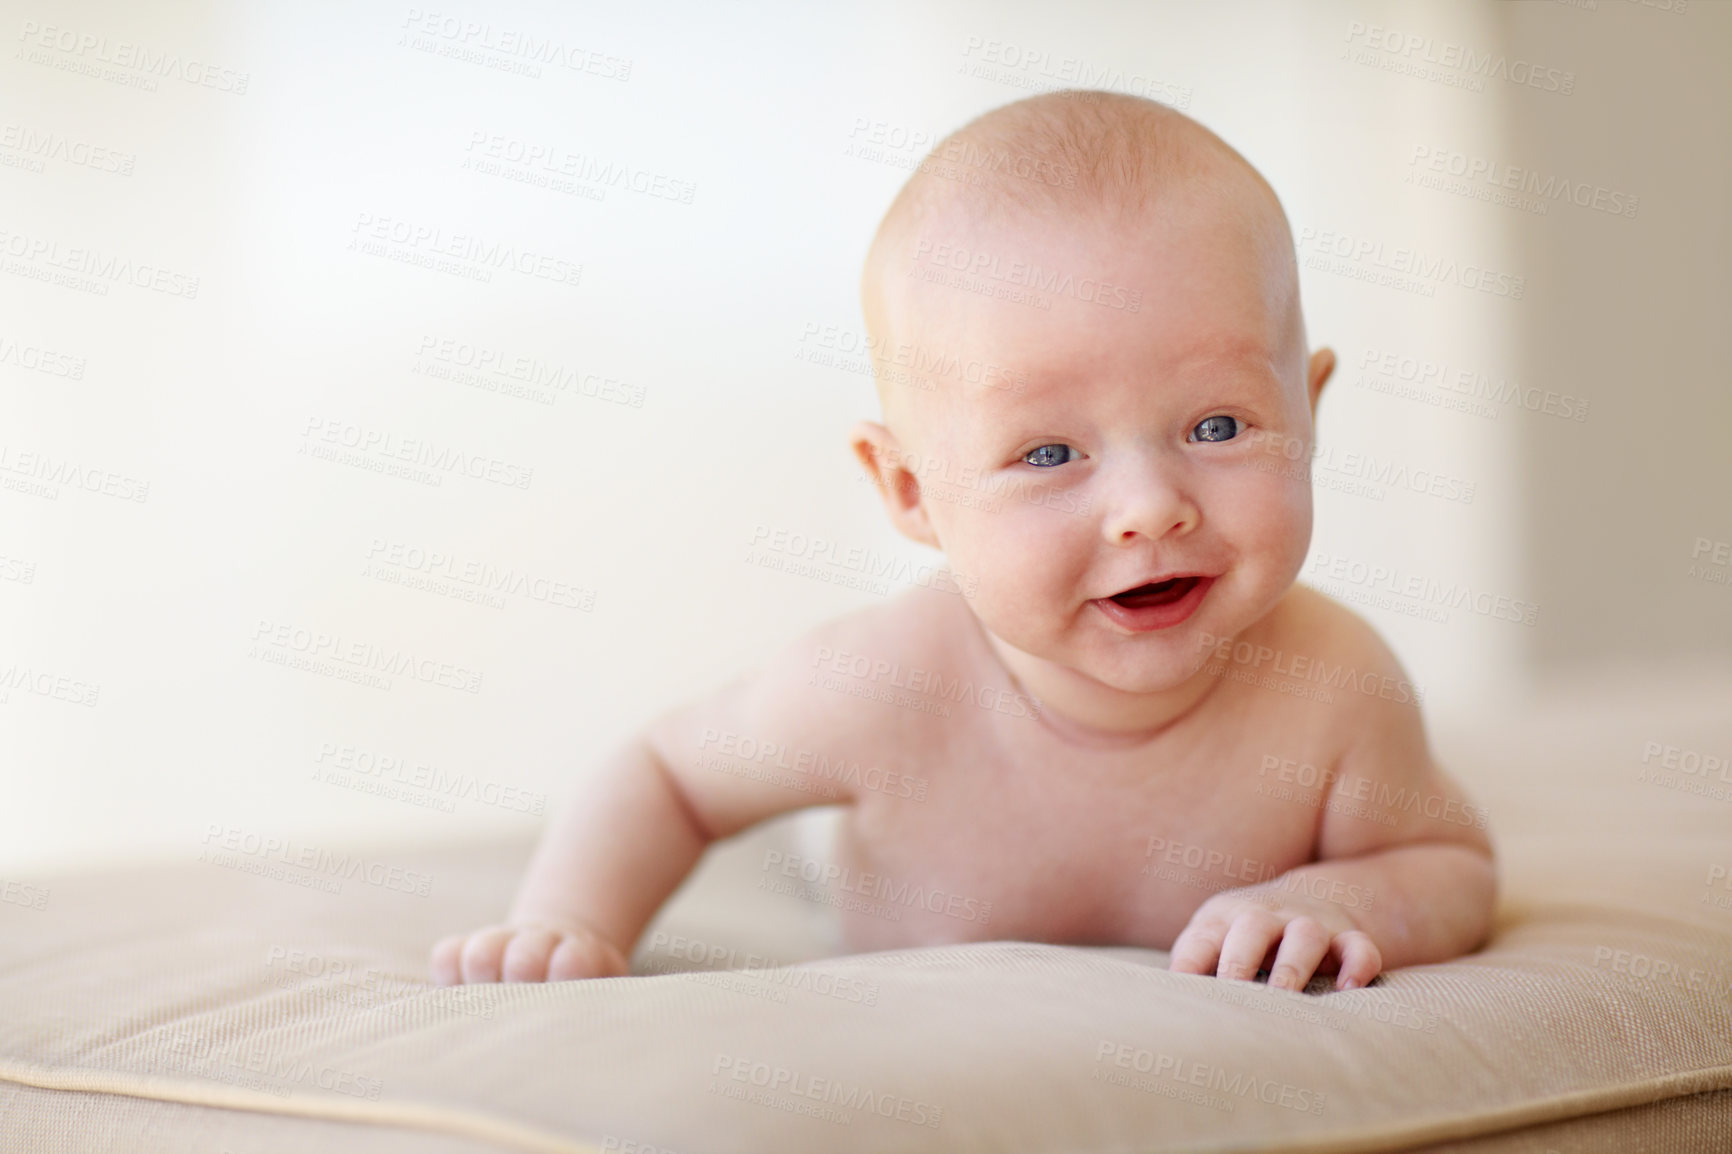 Buy stock photo Newborn, baby or portrait on sofa for healthy childhood development, growth or learning. Infant, smile or face on stomach or curious interest or search environment, safety or discovery time in lounge